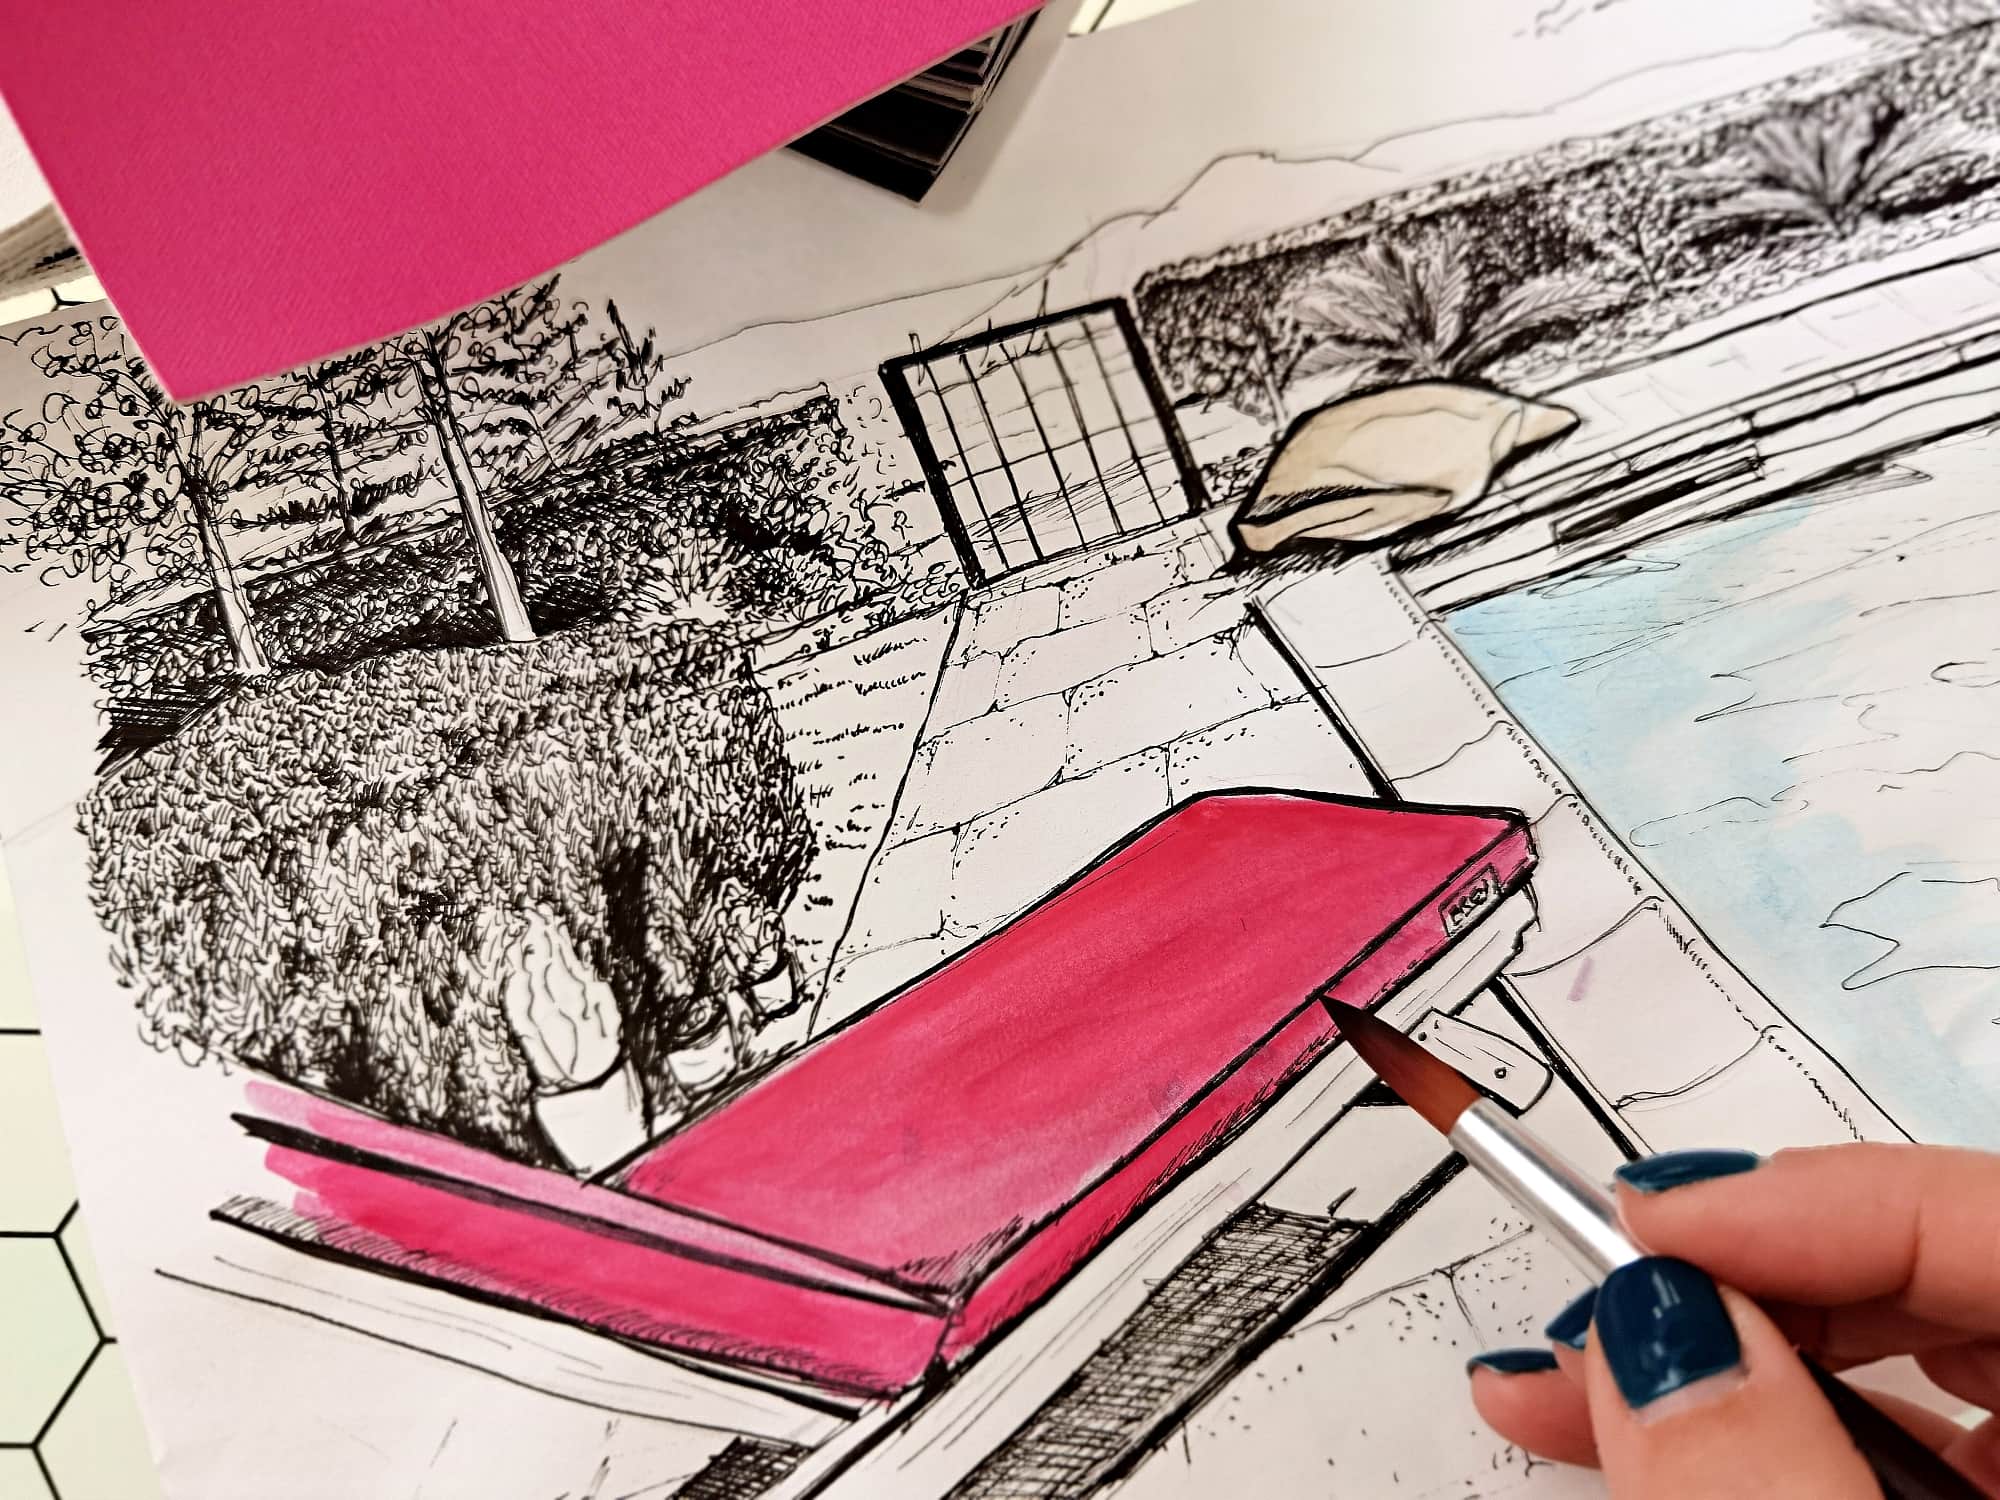 Frey individual sketch of premium, bespoke poolside sunbed cushions in magenta designed for comfort & your style by your pool.